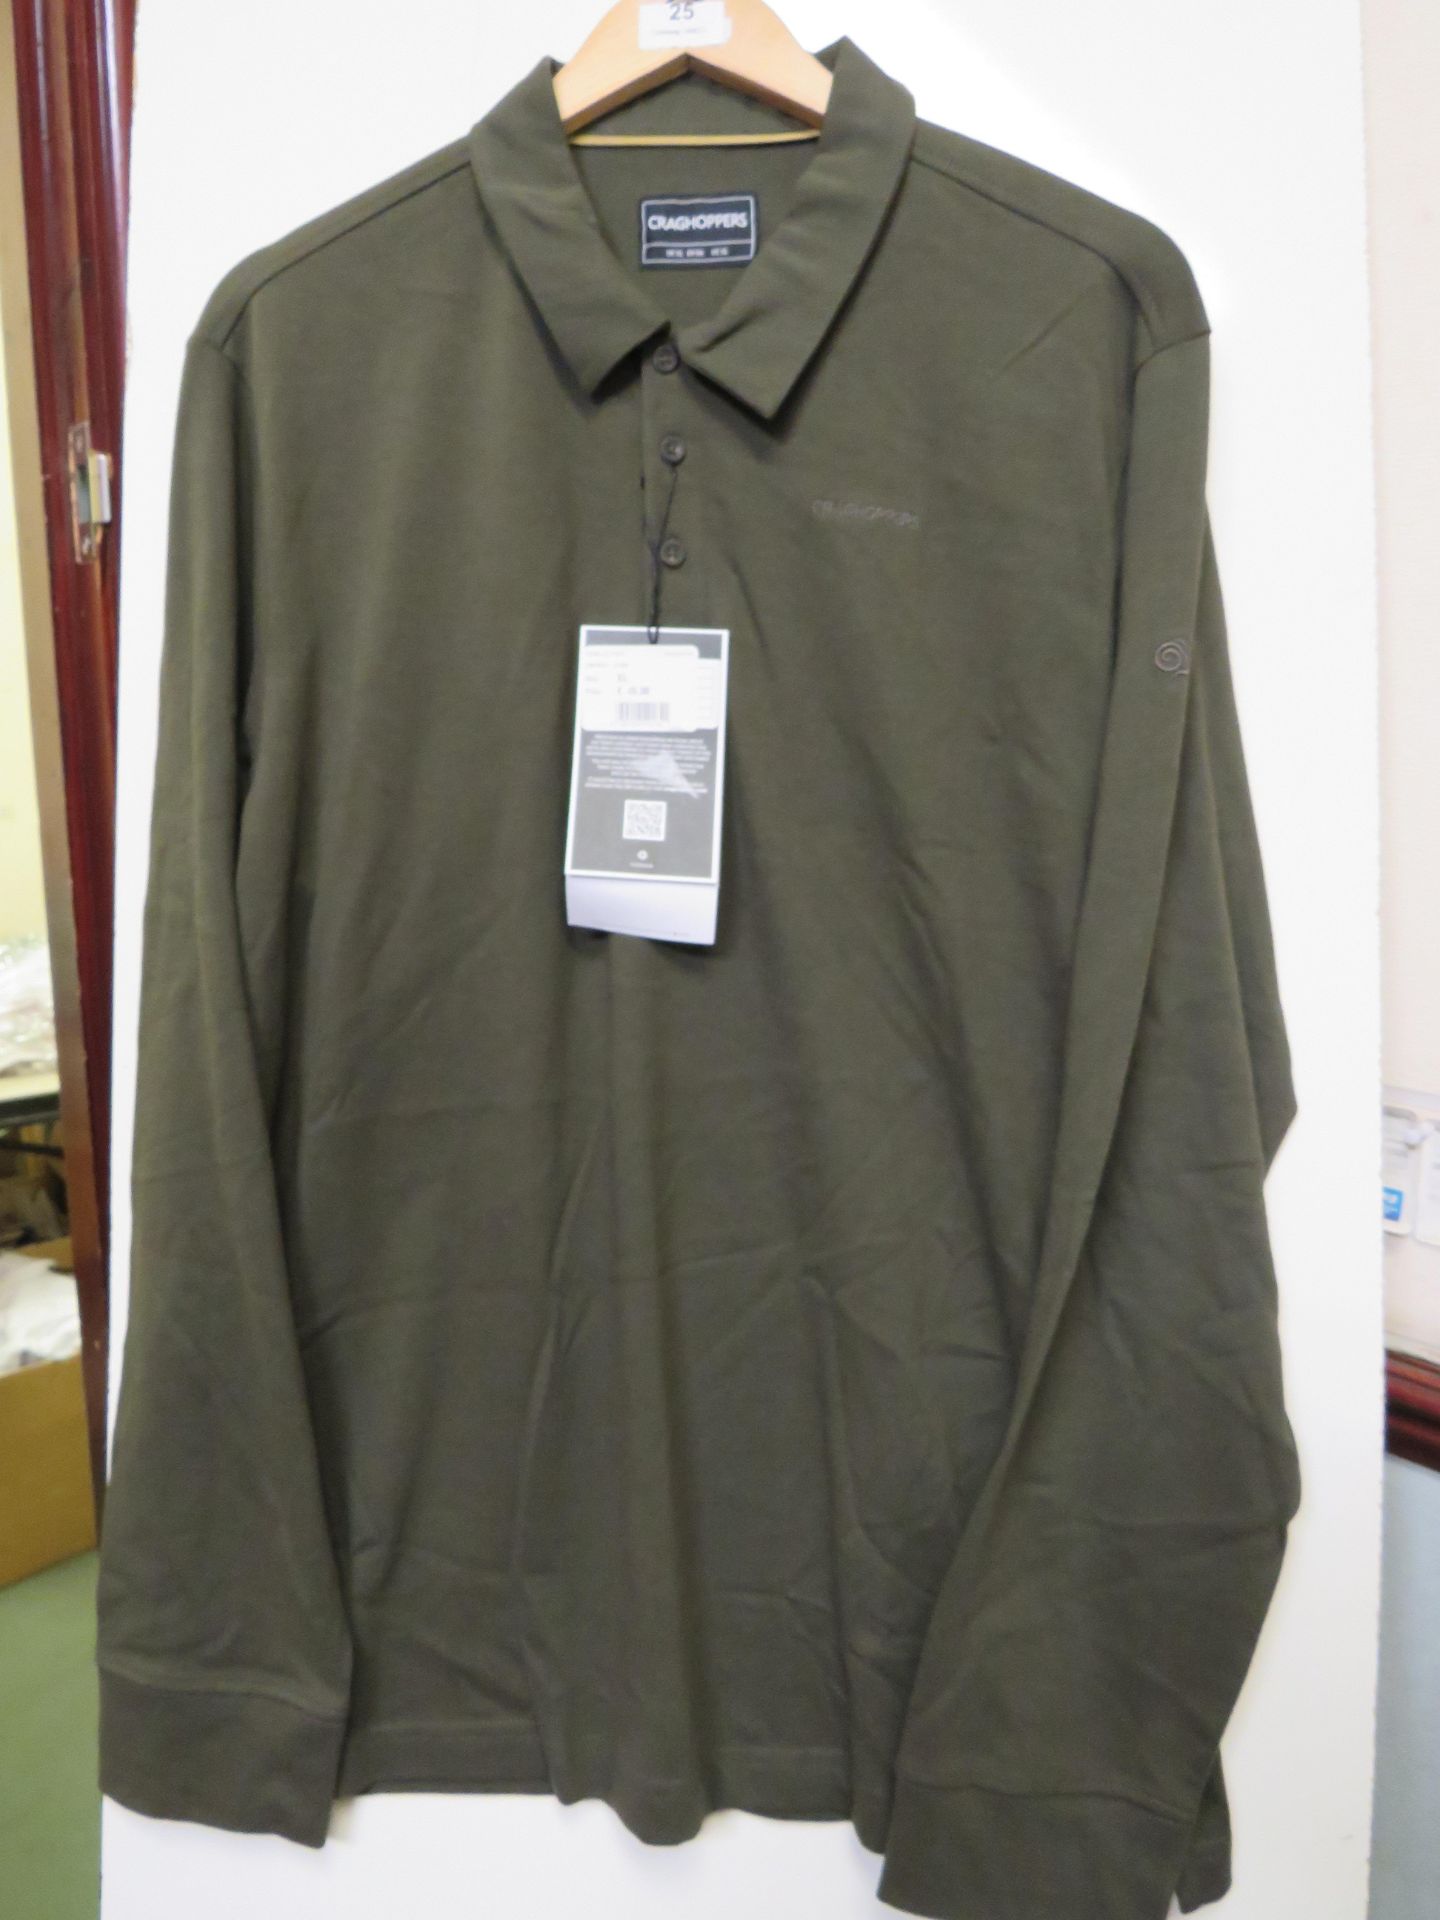 Craghopper Bryson Long Sleeve Polo Shirt, new size XL, RRP £45 - Image 2 of 2